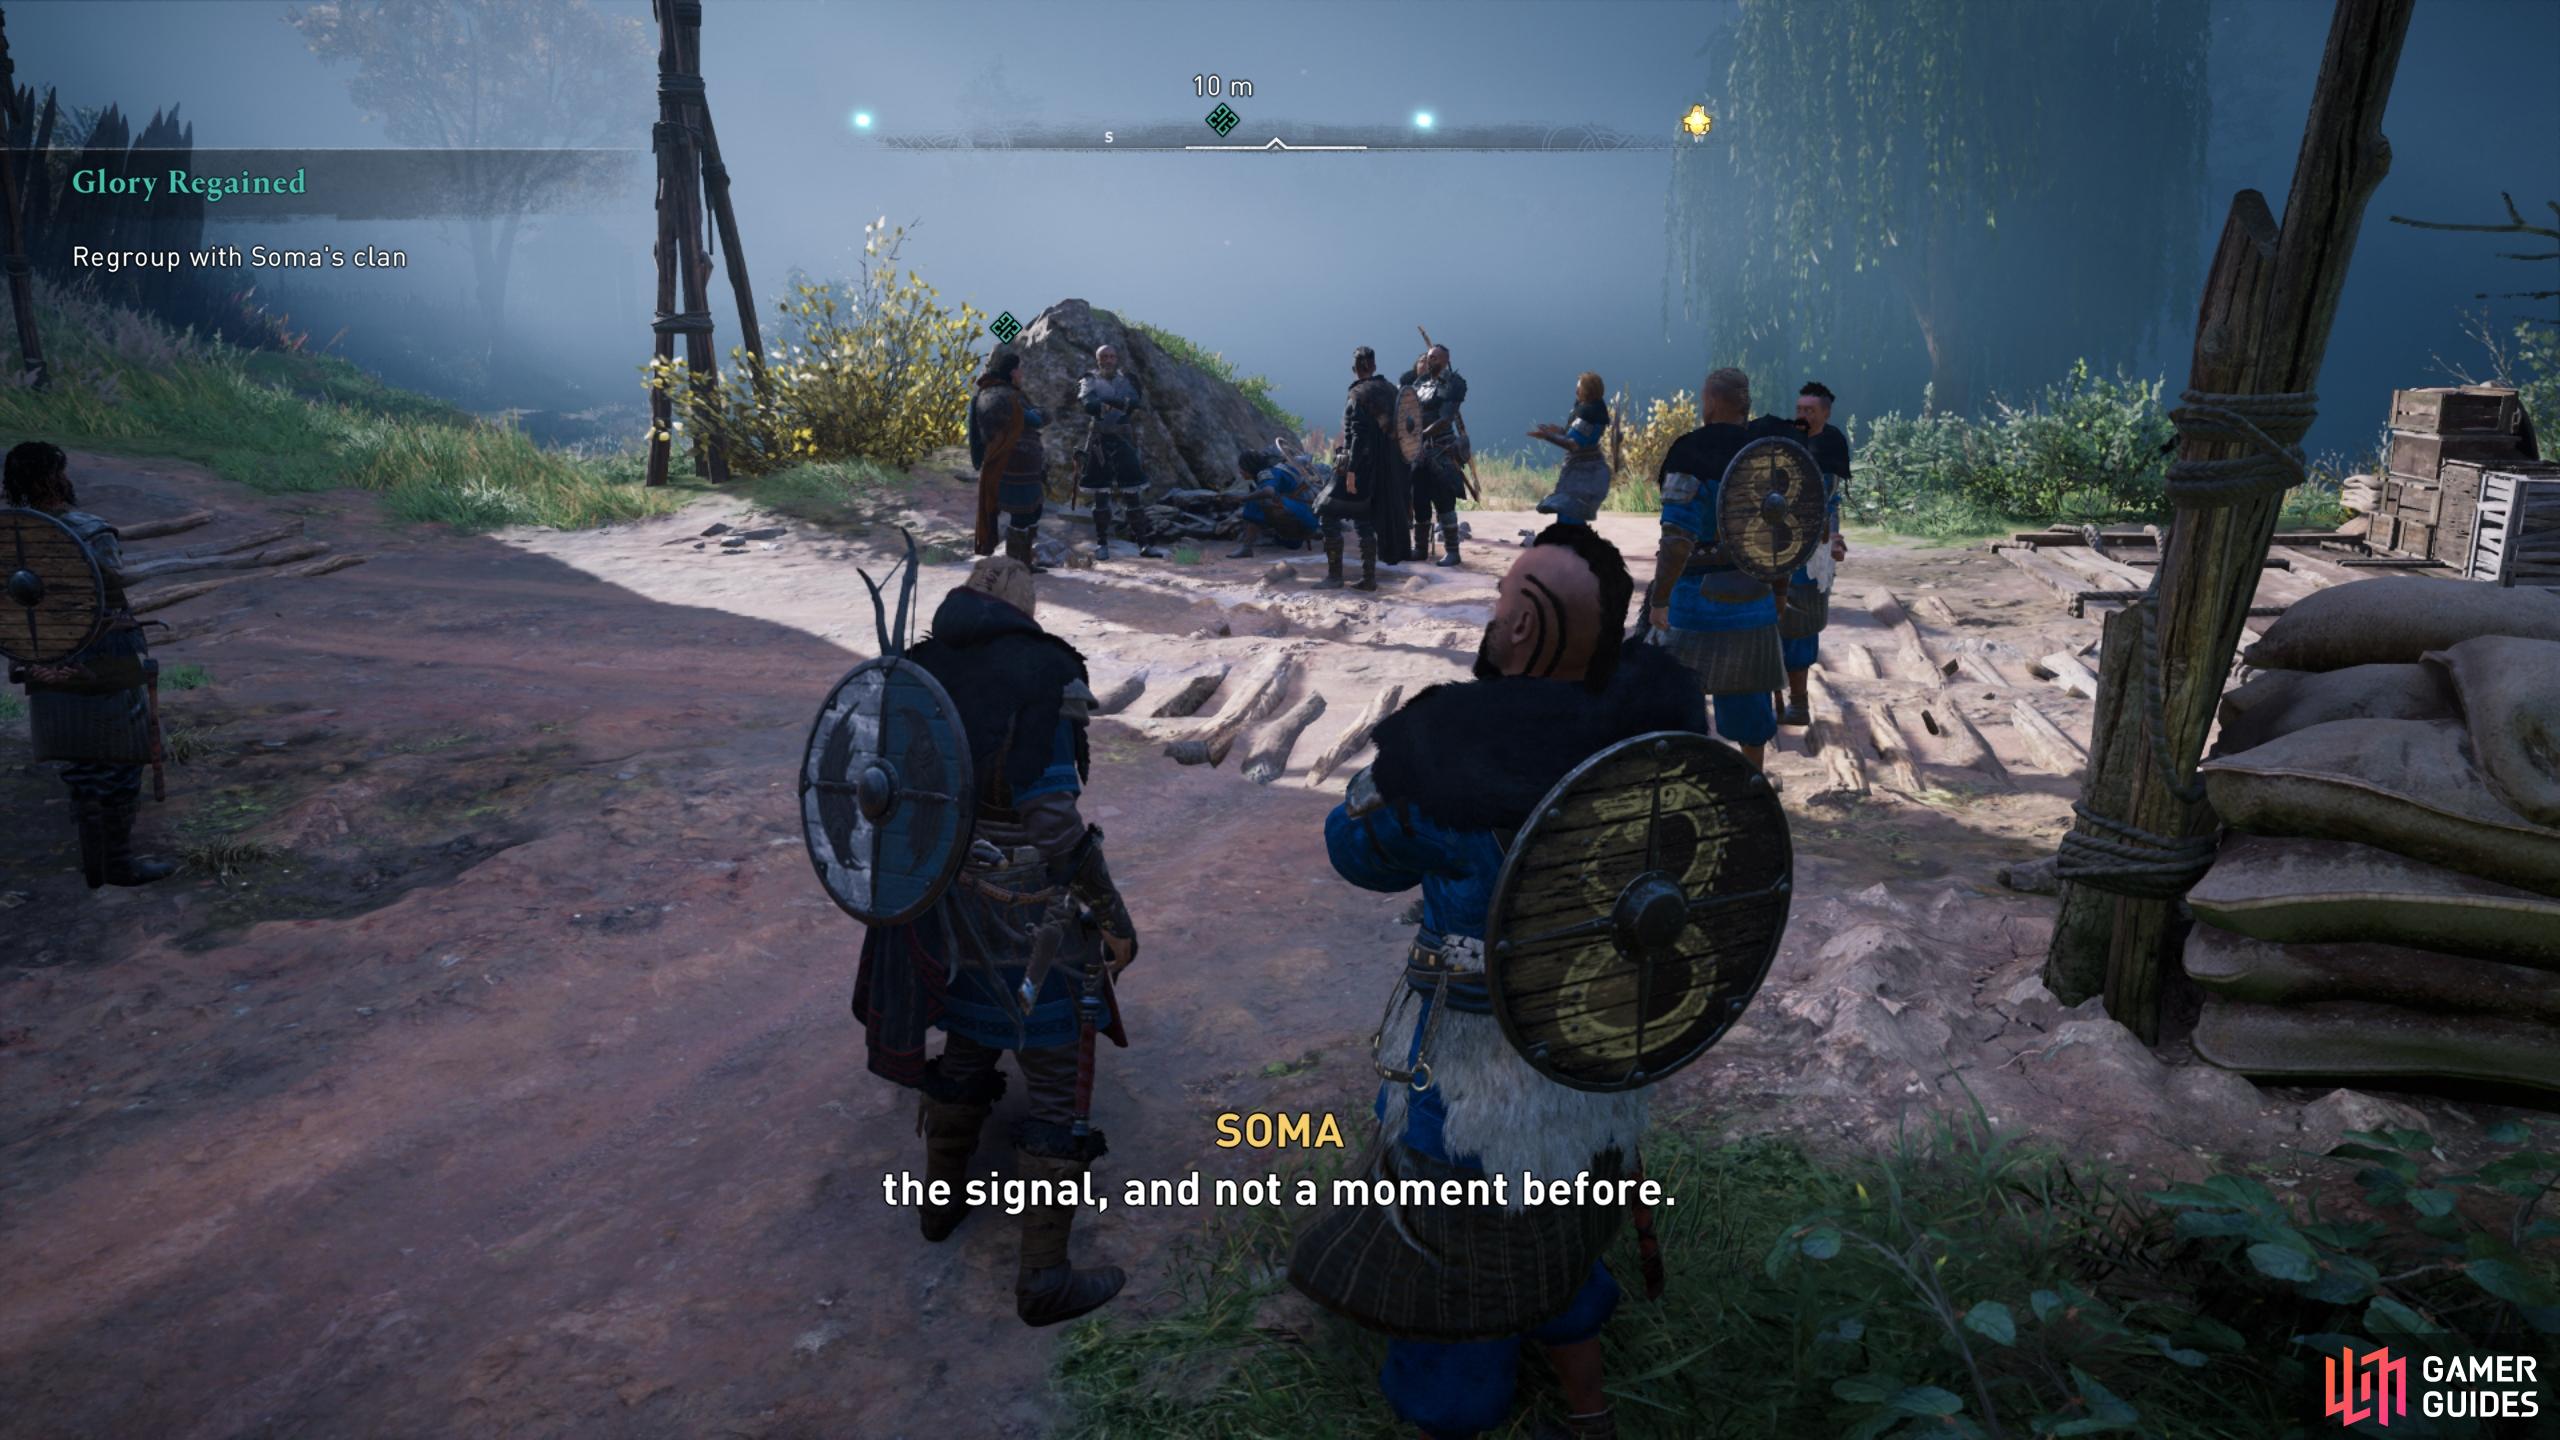 Assassin's Creed Valhalla - Soma's traitor: Who is the traitor in